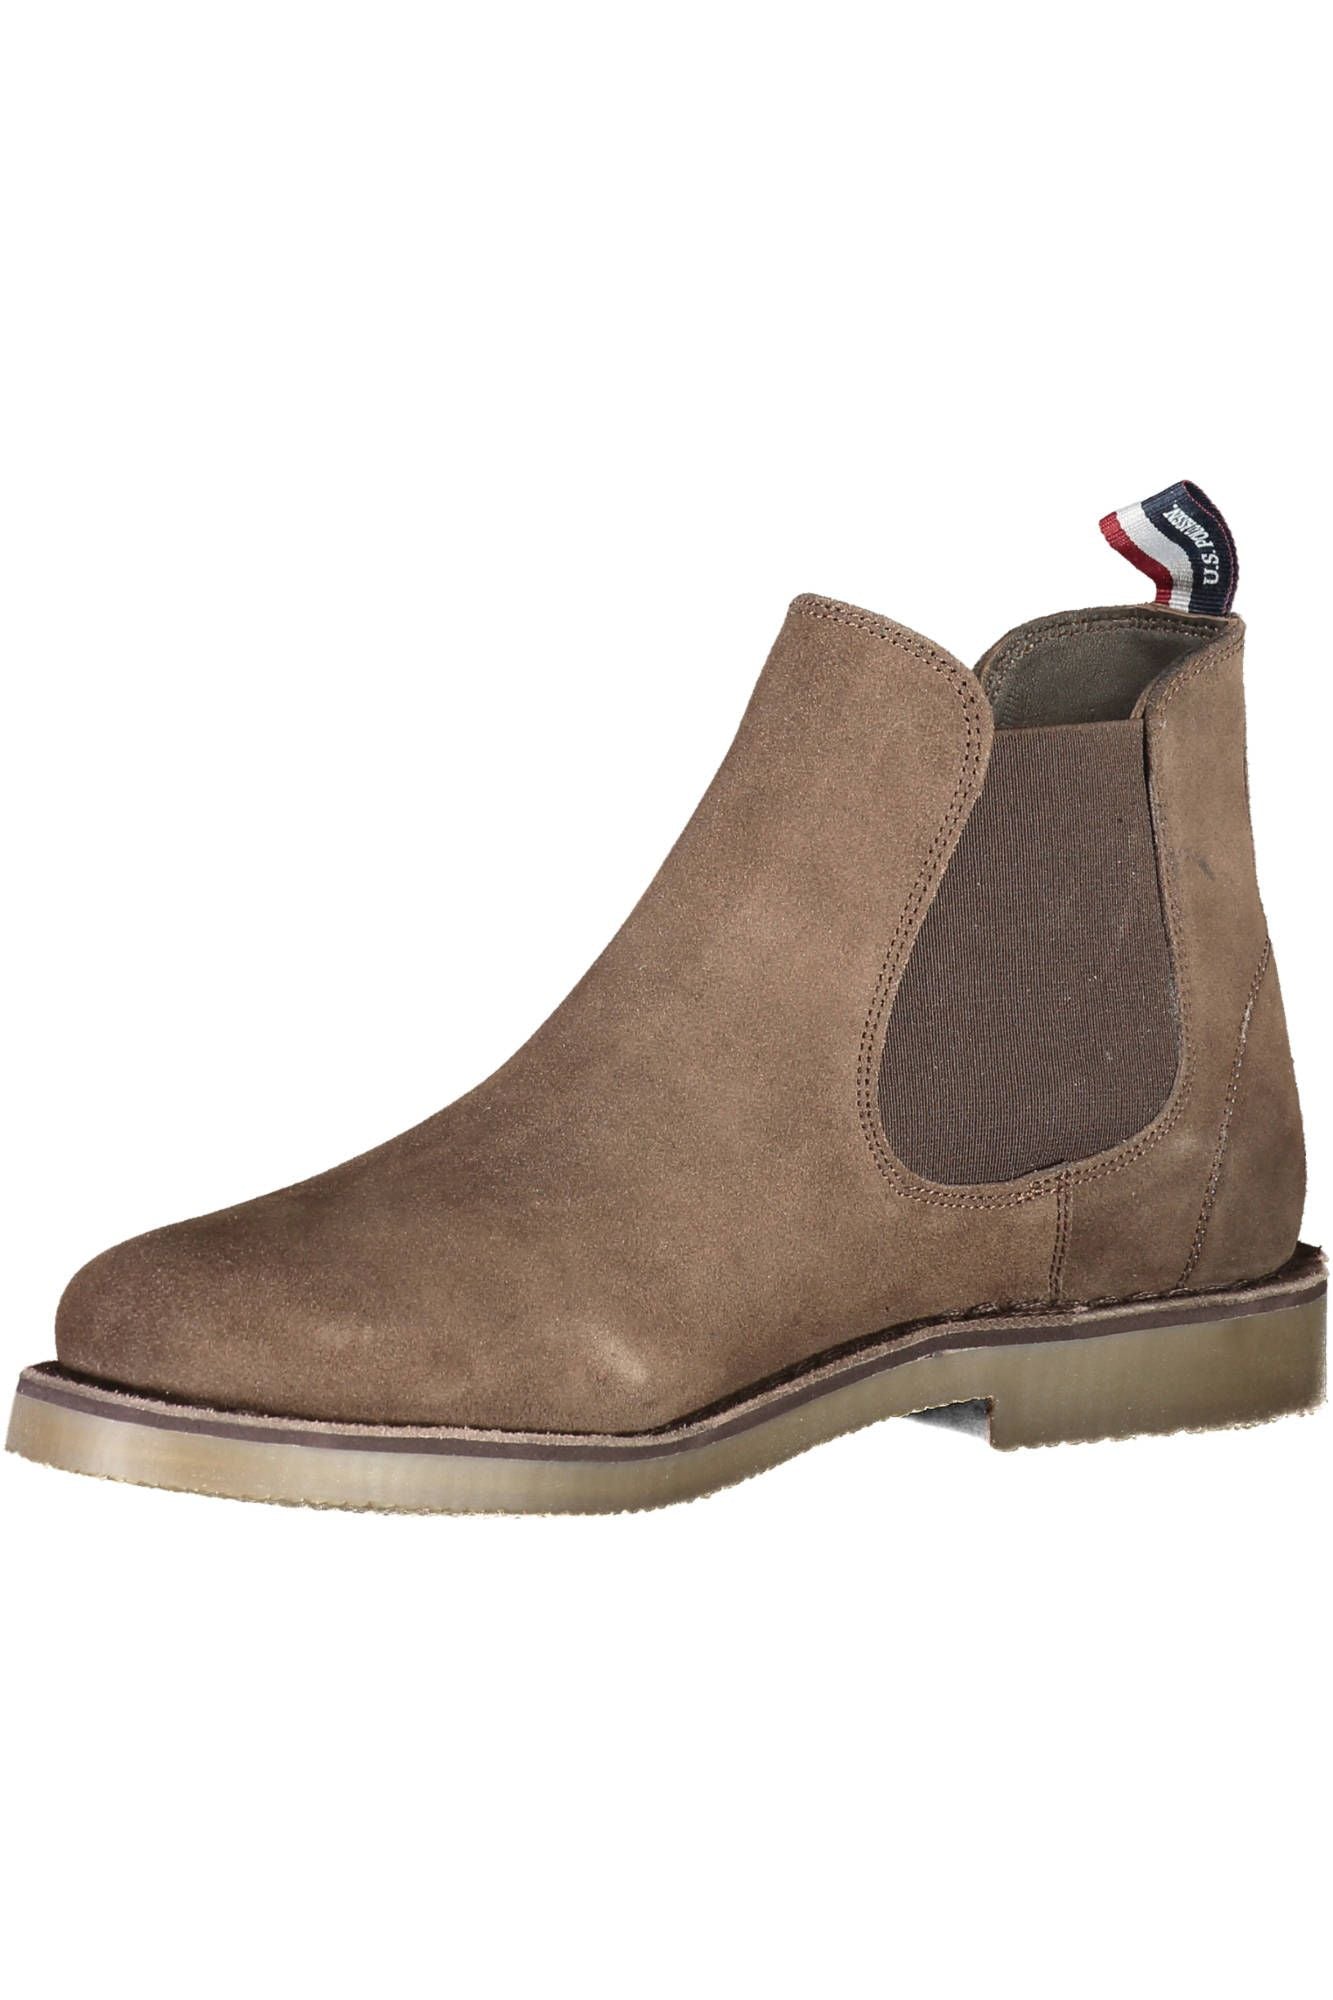 U.S. POLO ASSN. Elegant Ankle Boots with Logo Detailing